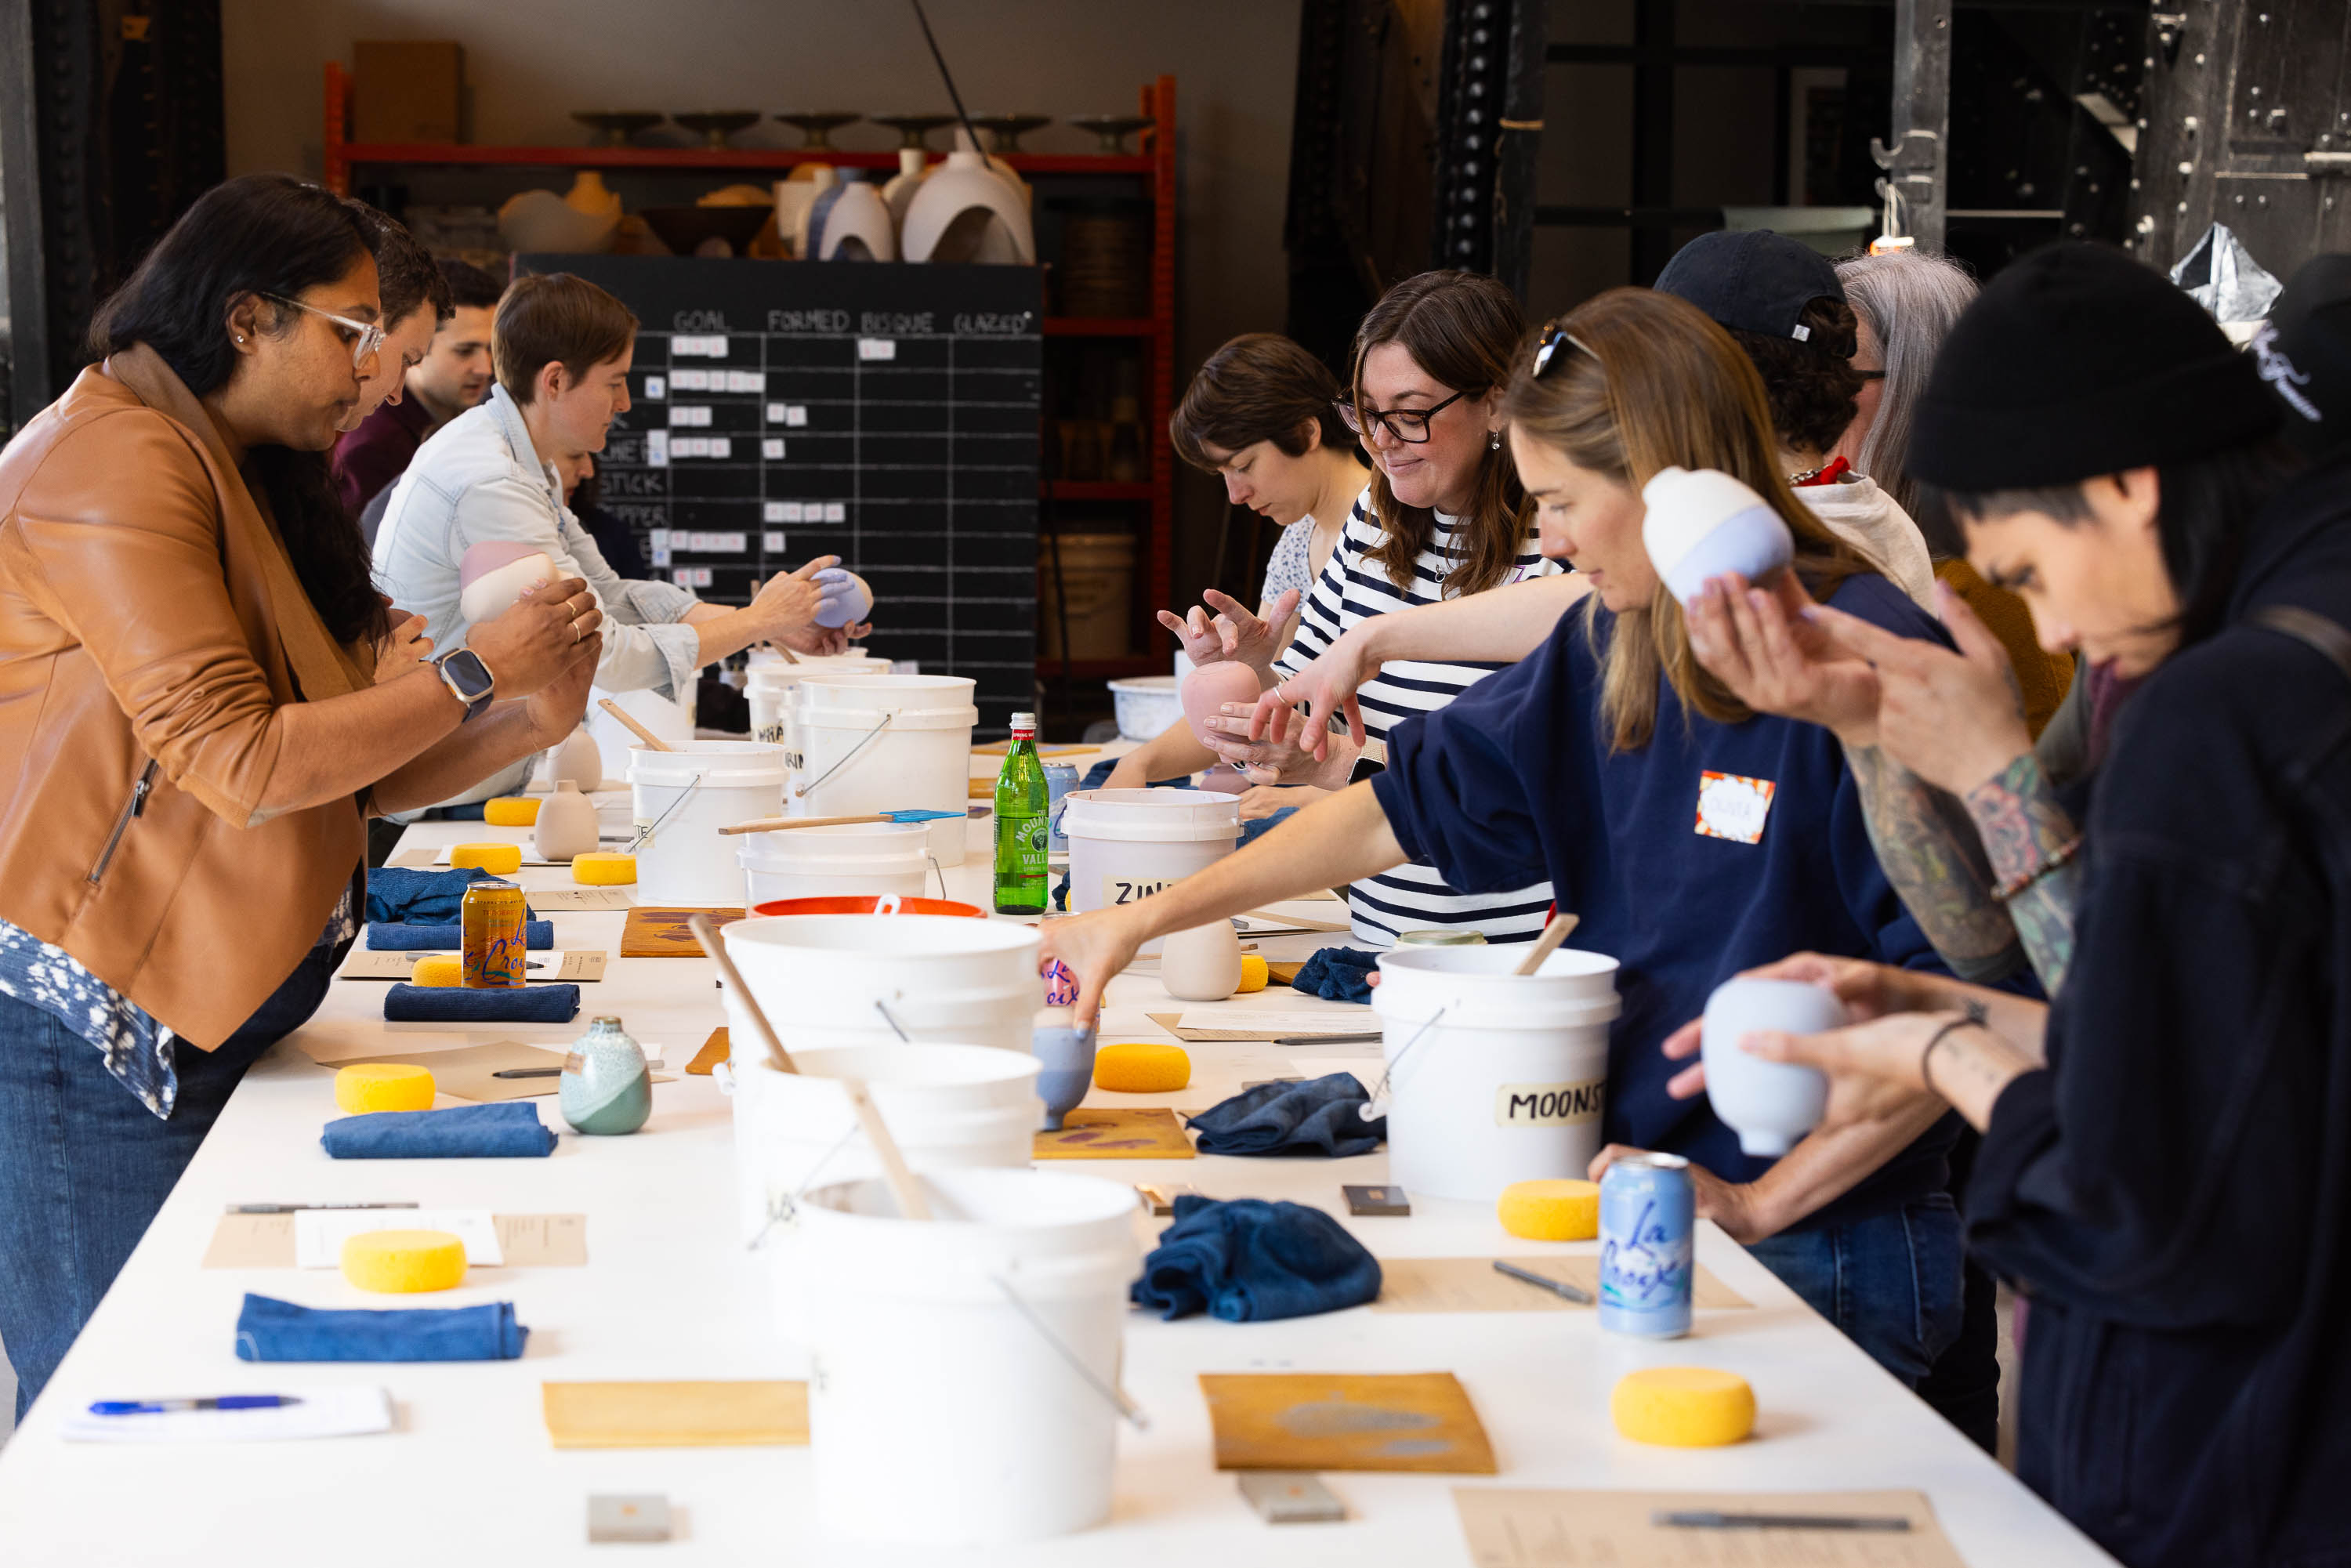 A group of people is engaged in a pottery painting workshop, focusing on their individual pieces.